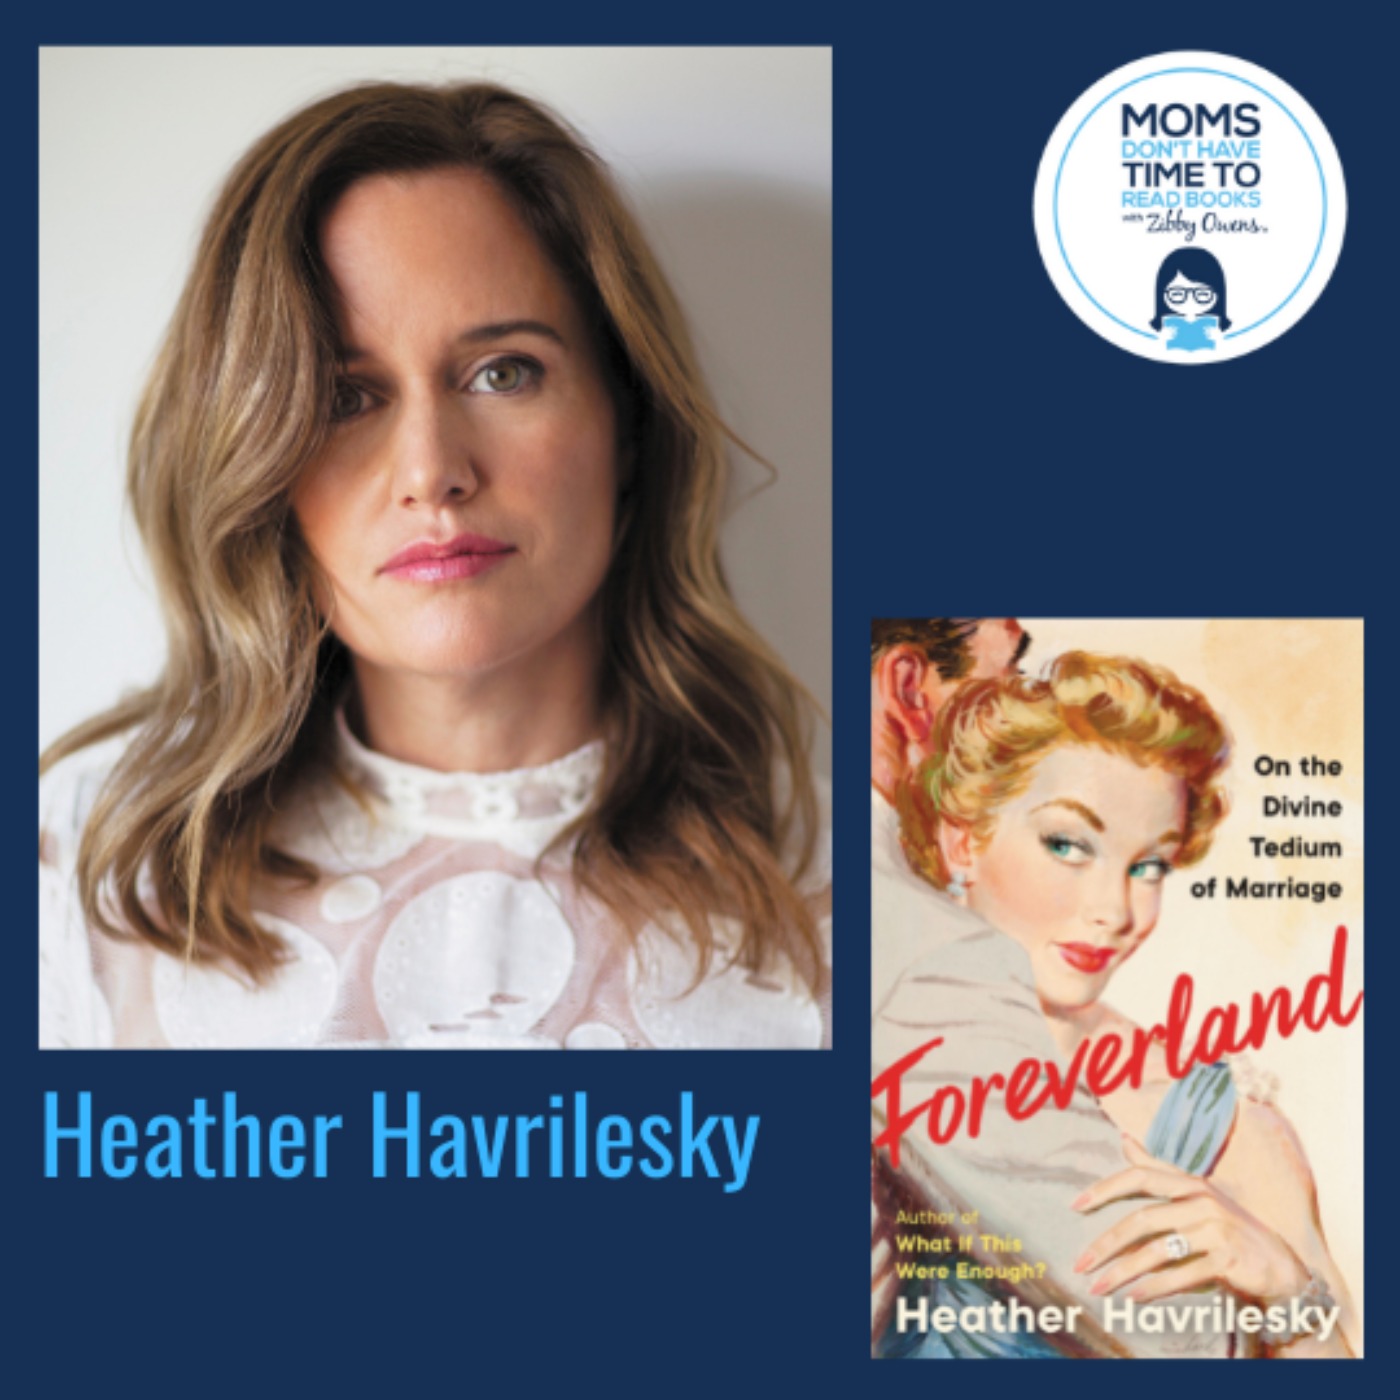 Heather Havrilesky, FOREVERLAND: On the Divine Tedium of Marriage